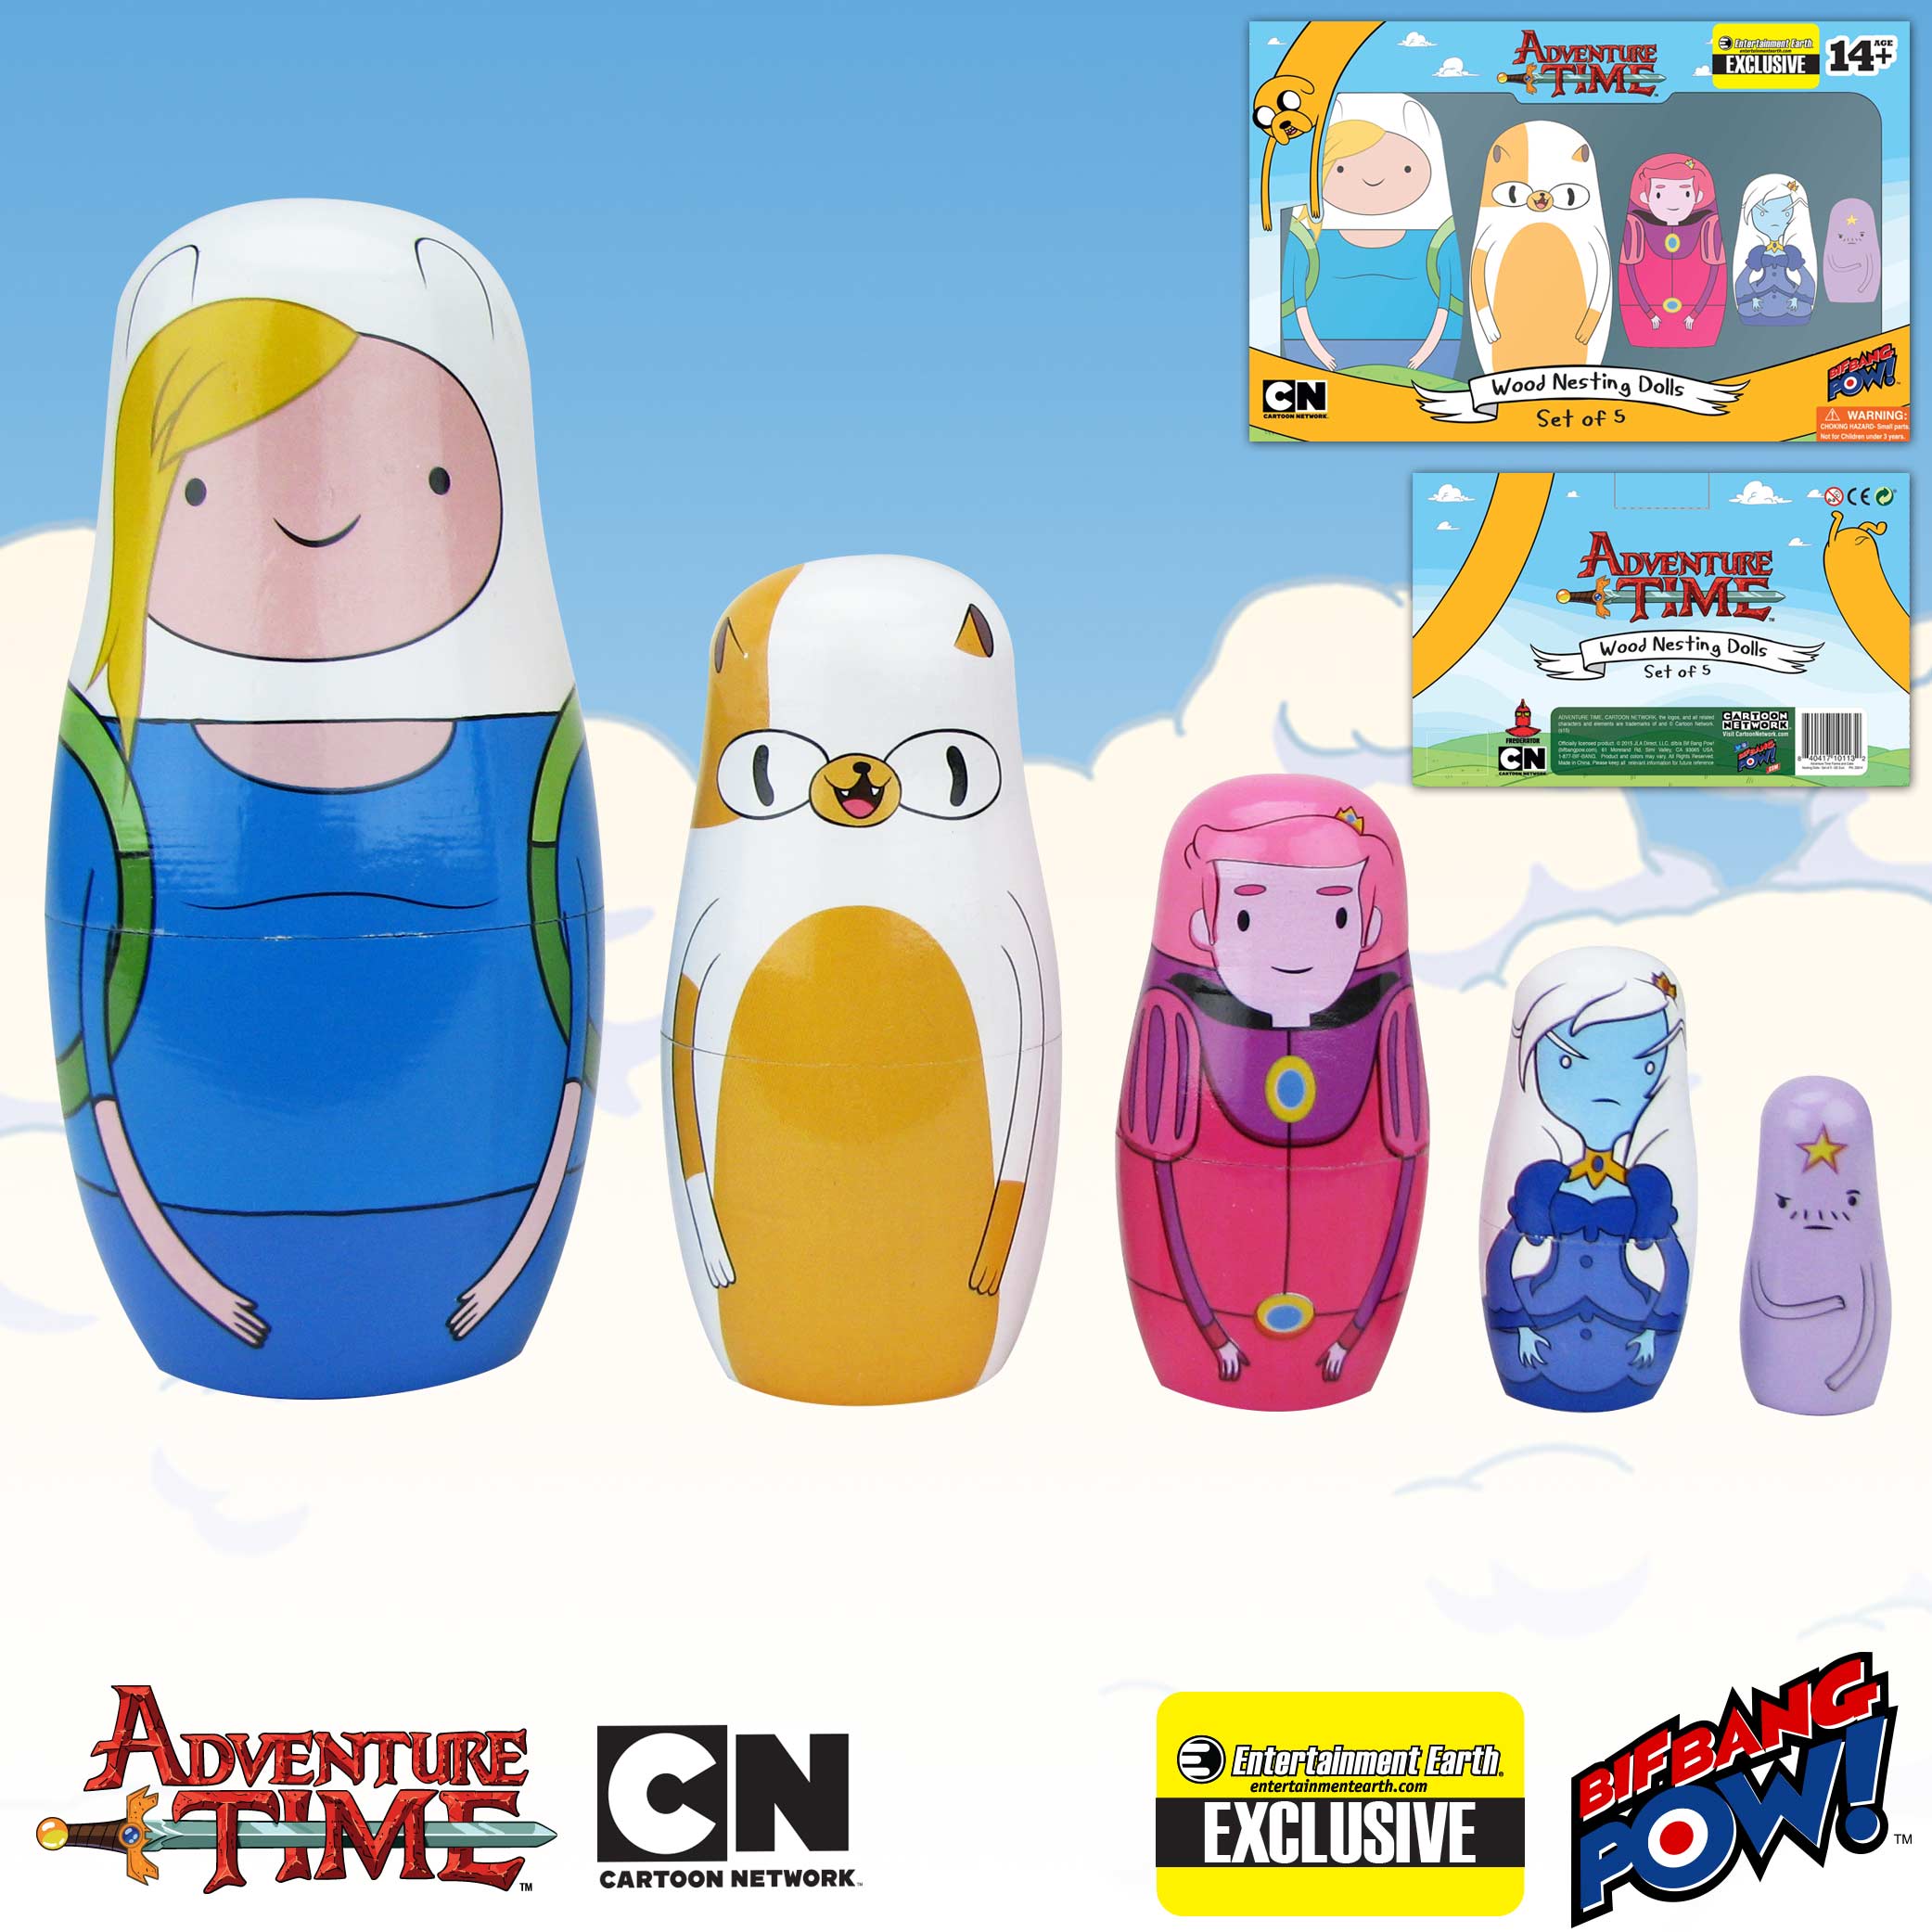 Adventure Time Fionna and Cake Nesting Dolls